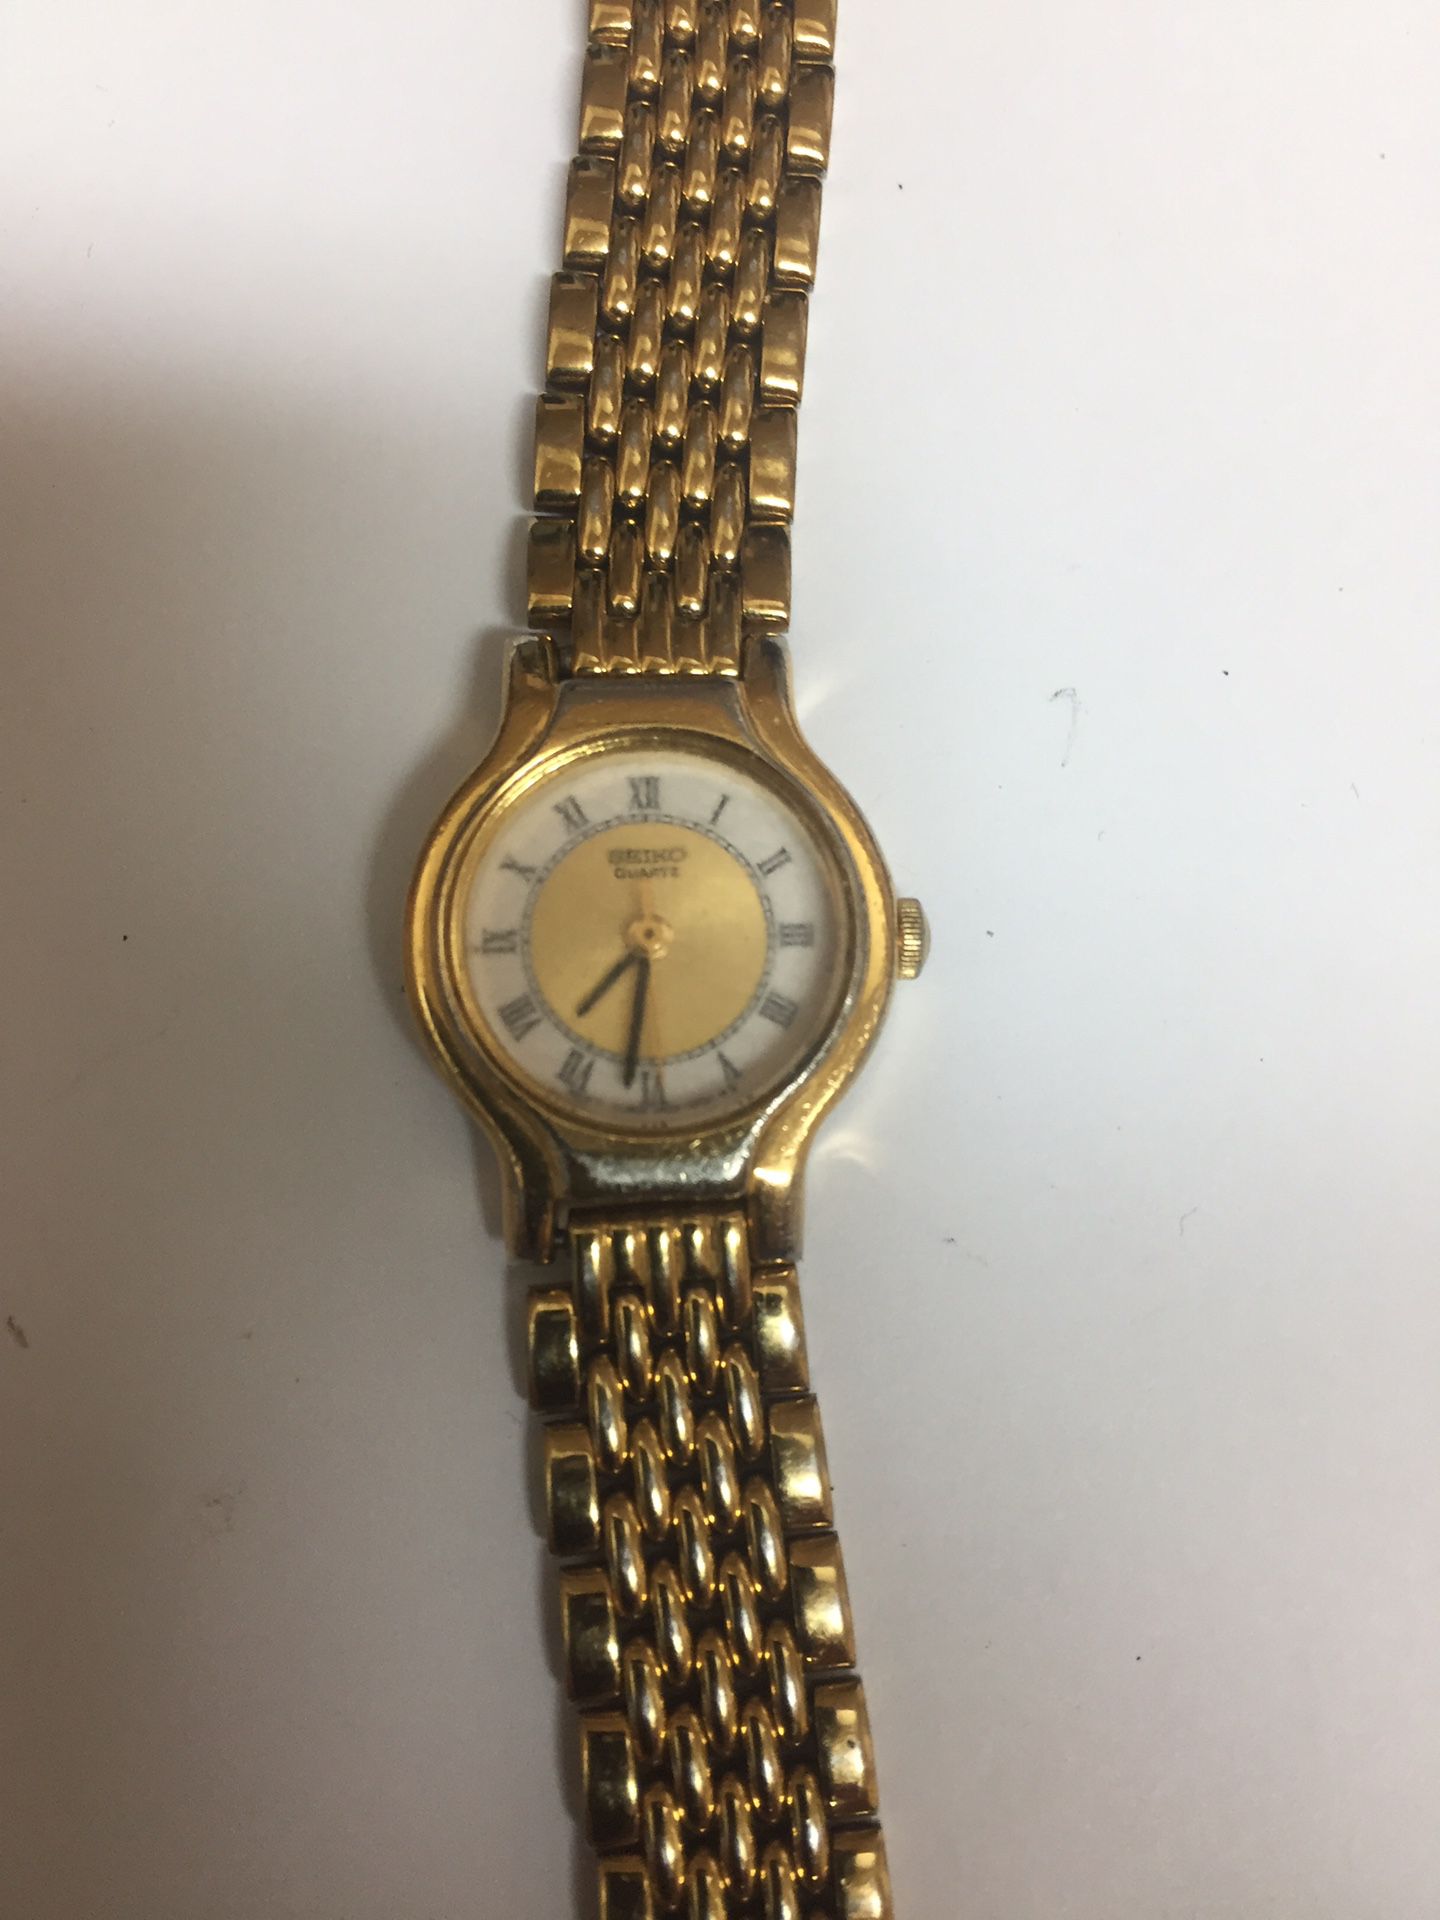 Women’s Gold Seiko Watches (Set of 5) for Sale in Katy, TX - OfferUp